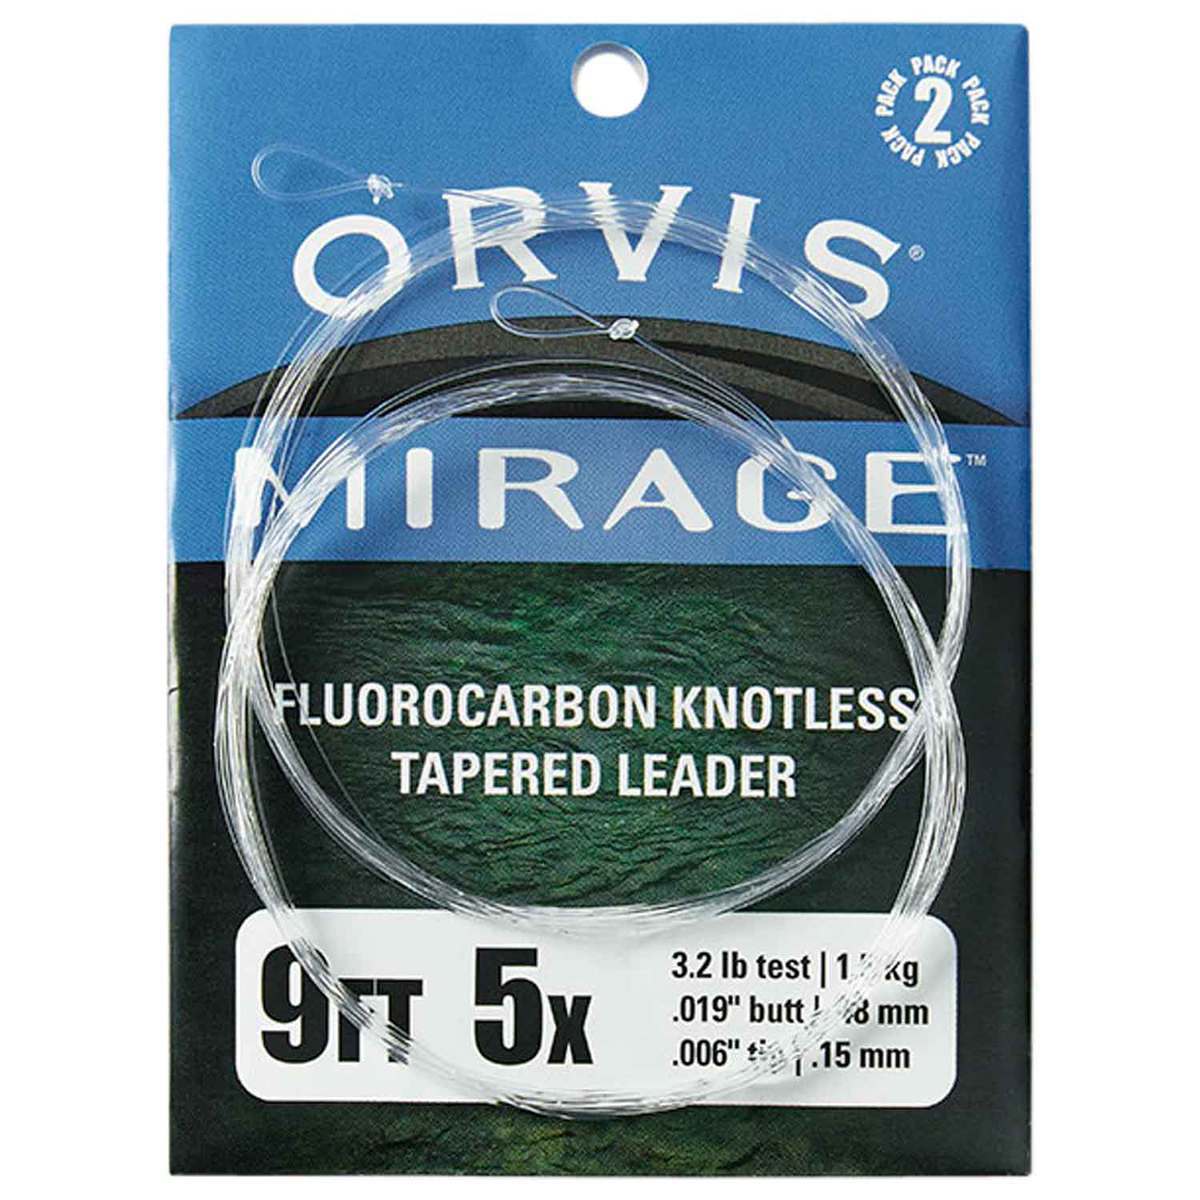 Orvis Fluorocarbon Mirage Trout Leader - 2 Pack, 3X